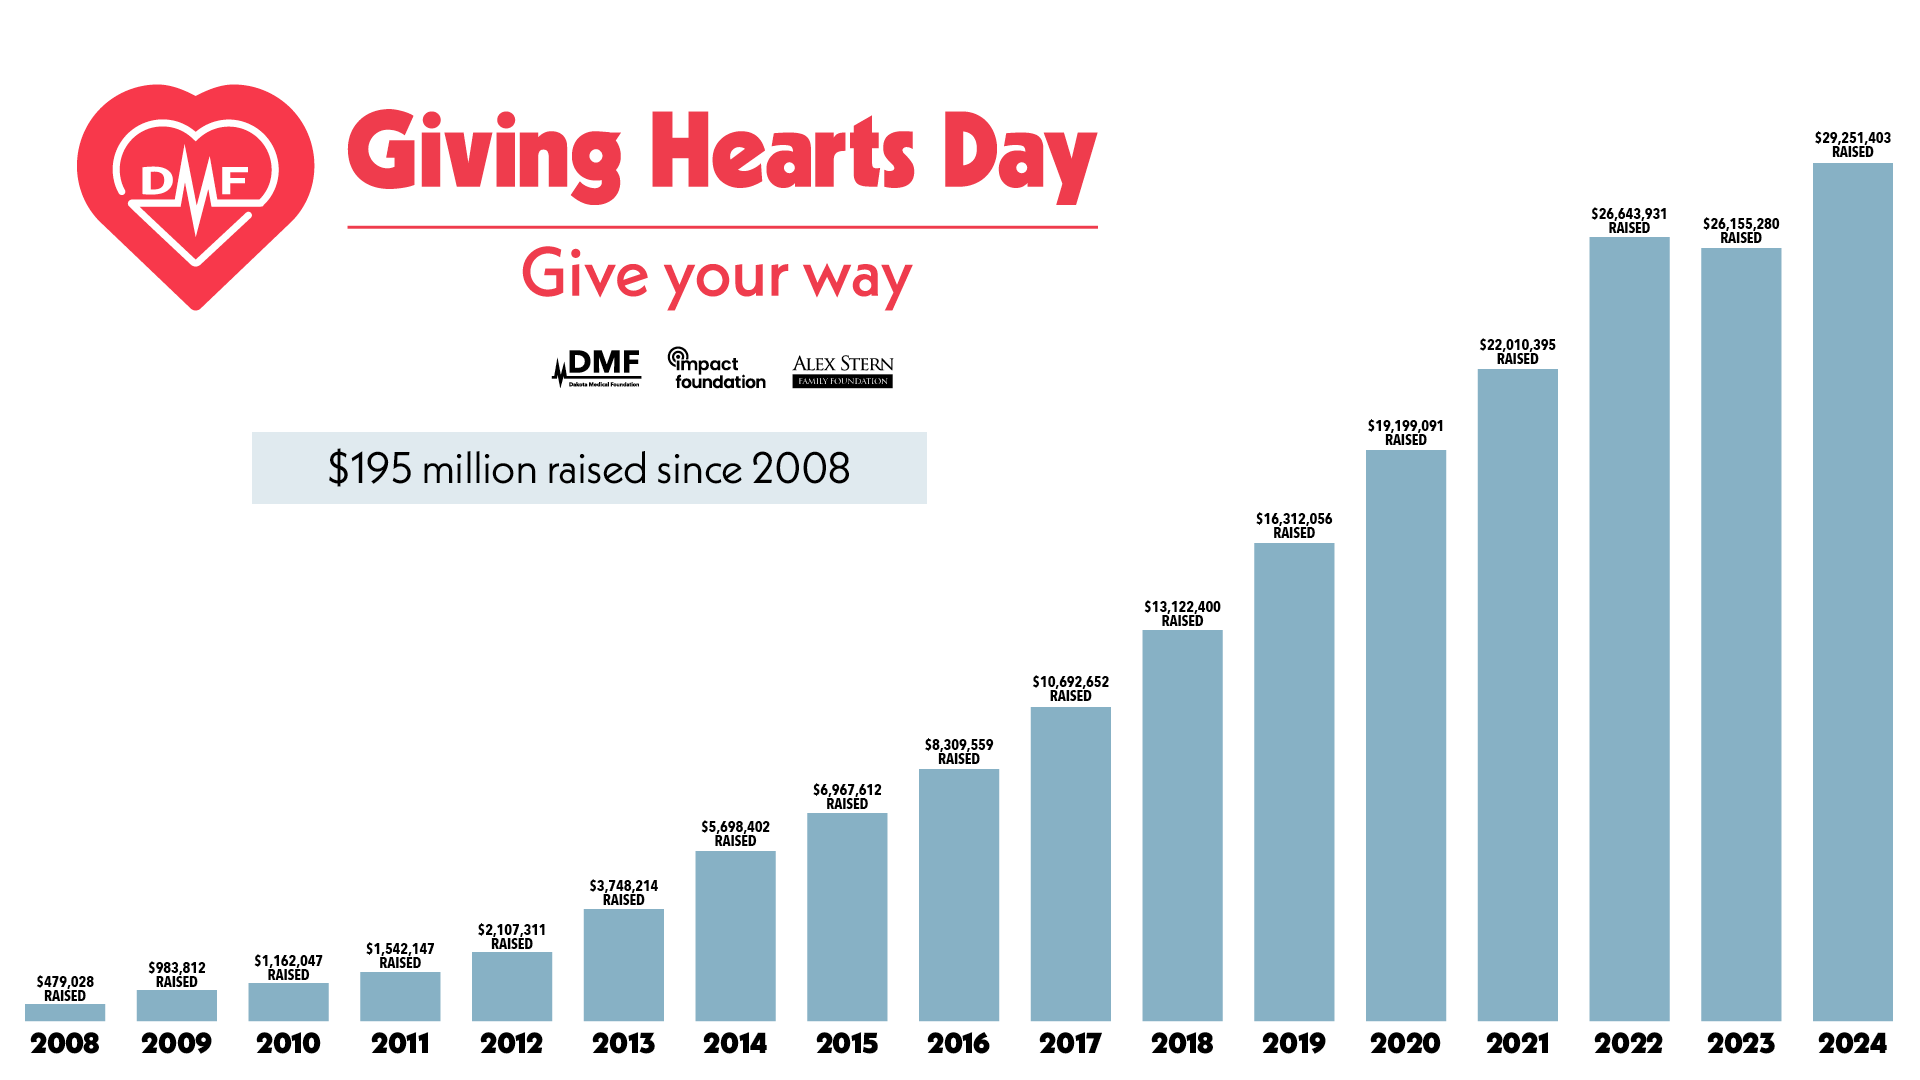 History of Giving Hearts Day